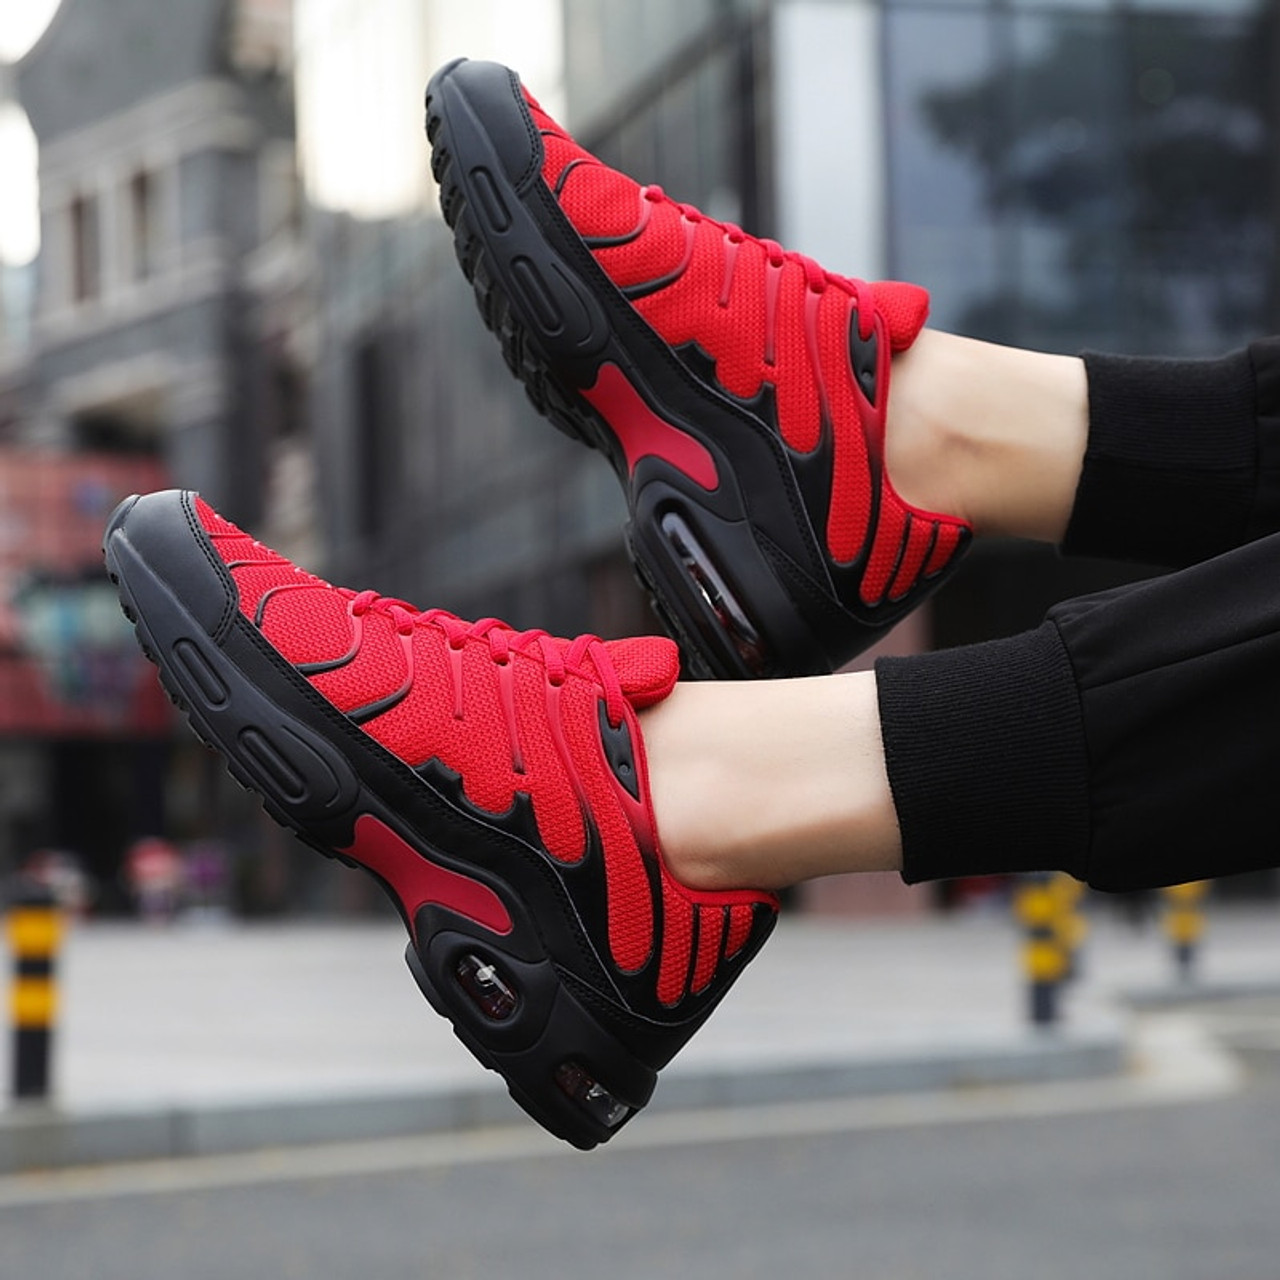 fashion breathable sport running shoes